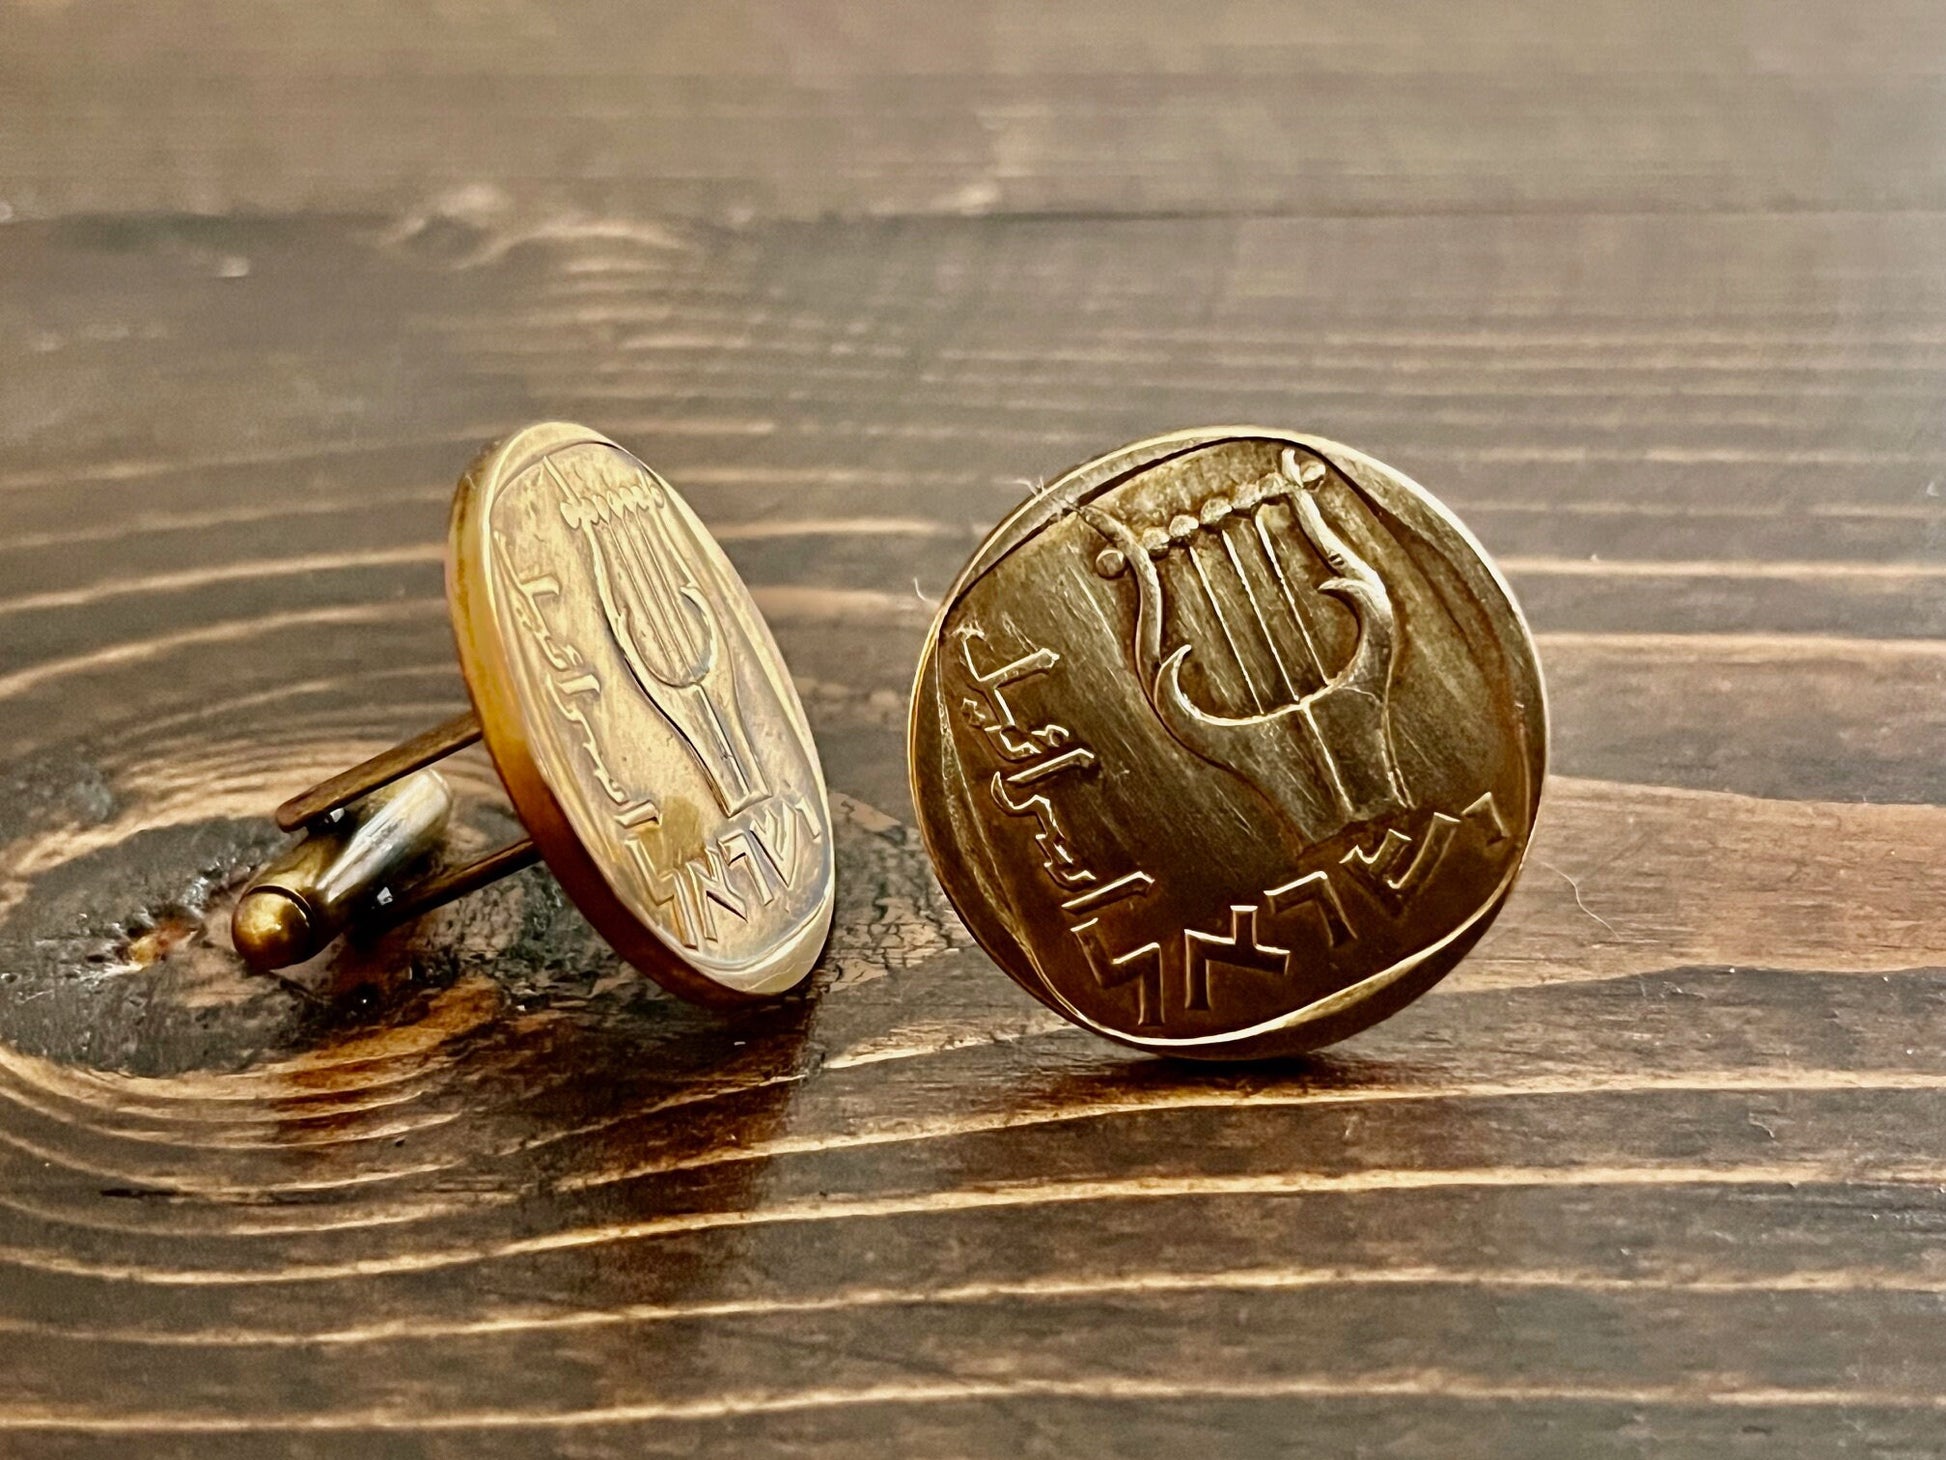 Israel Coin Cuff Links Israeli Custom Made Vintage and Rare coins - Personal Touch One-of-Kind Coin Enthusiast - Suit and Tie Accessory